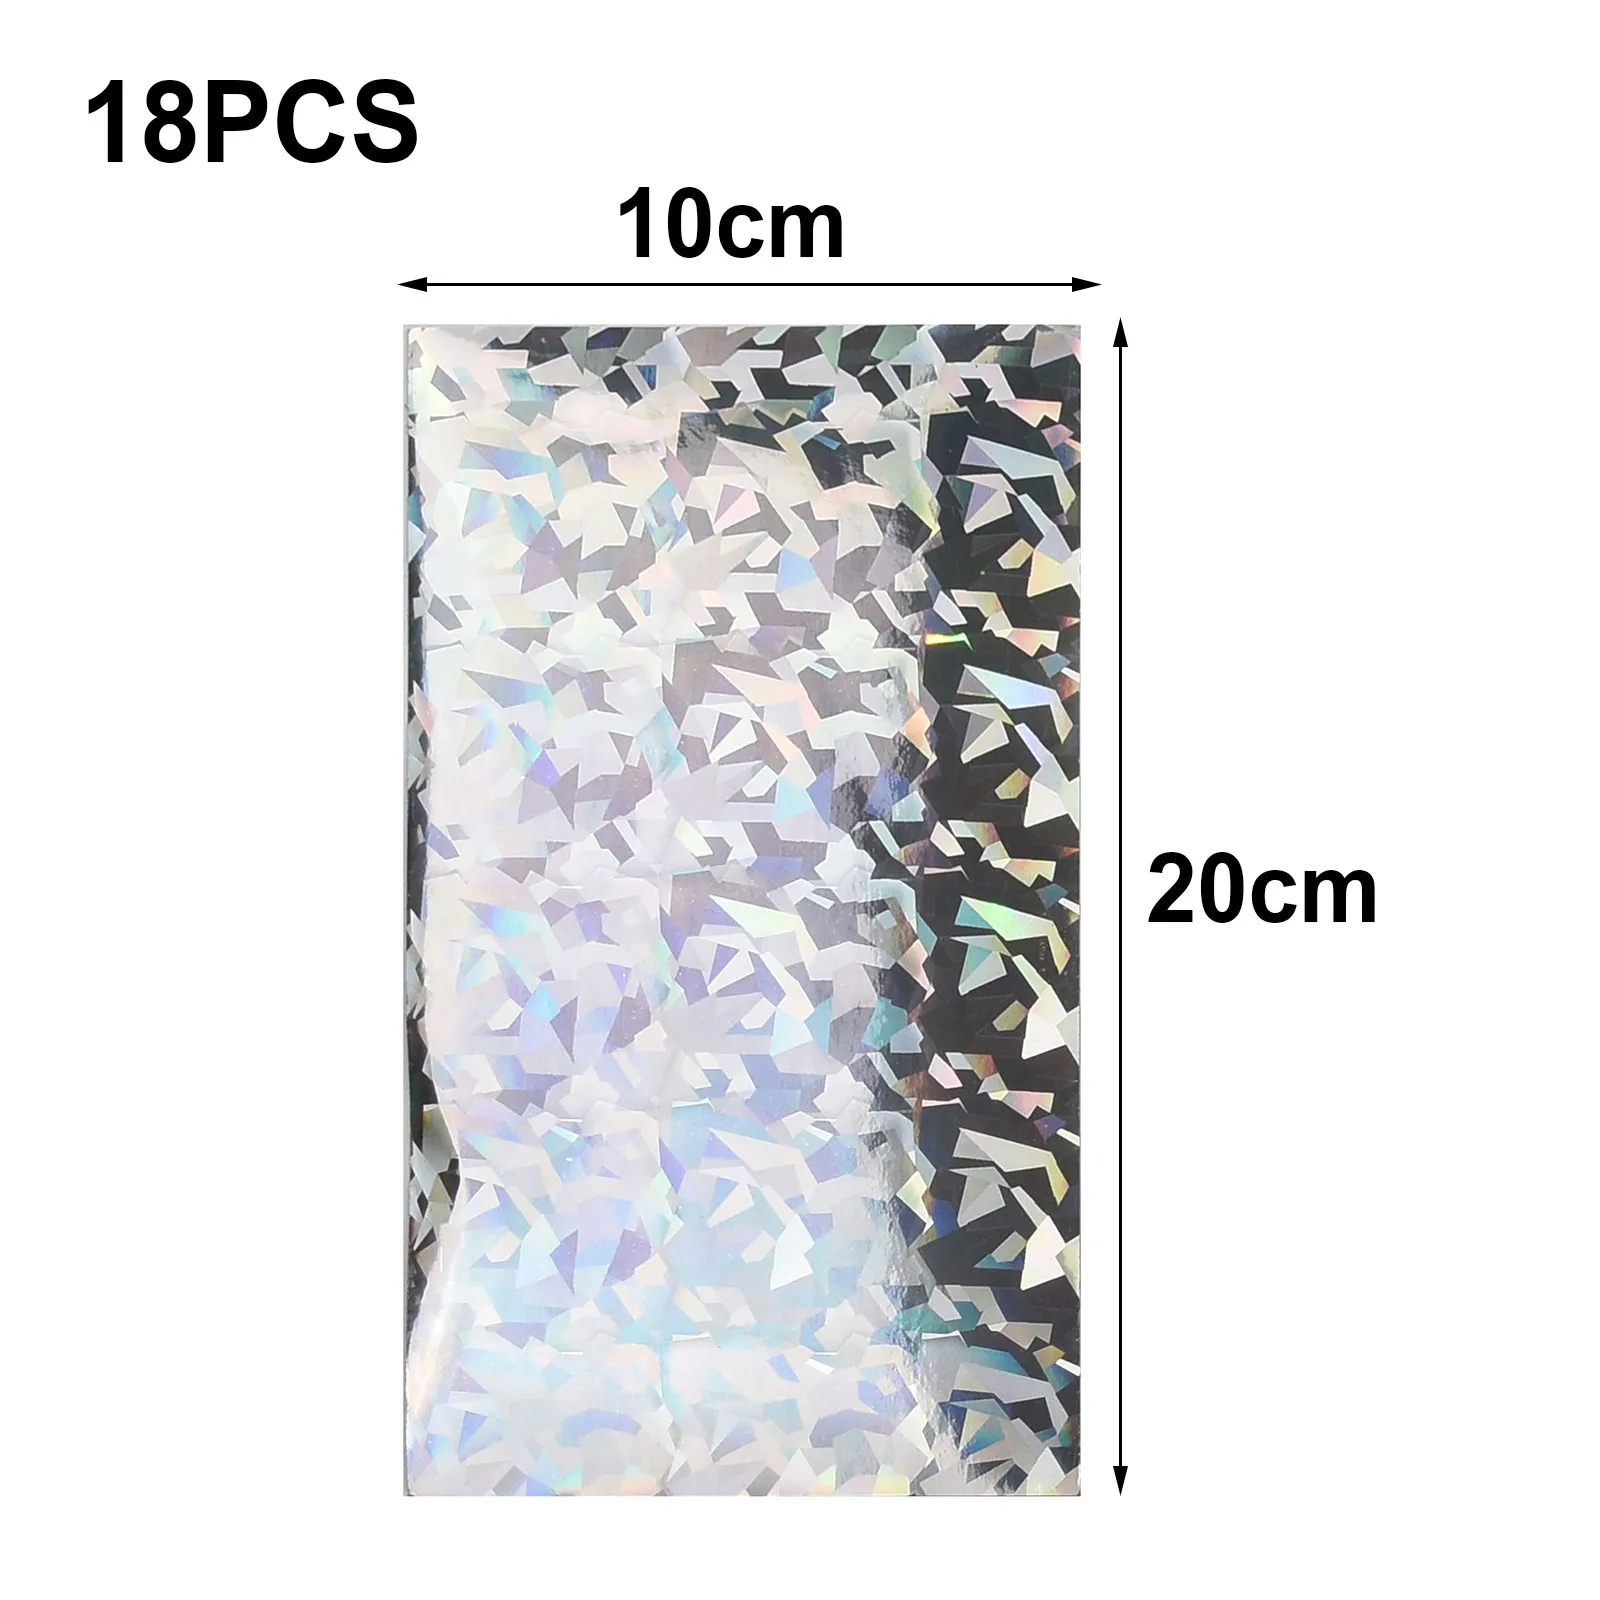 

18pcs 20x10cm Flasher/Dodger/Lure Holographic Reflective Belt Fishing Lure Tape DIY Raw Materials 6 Color Fishing Bait Tackle